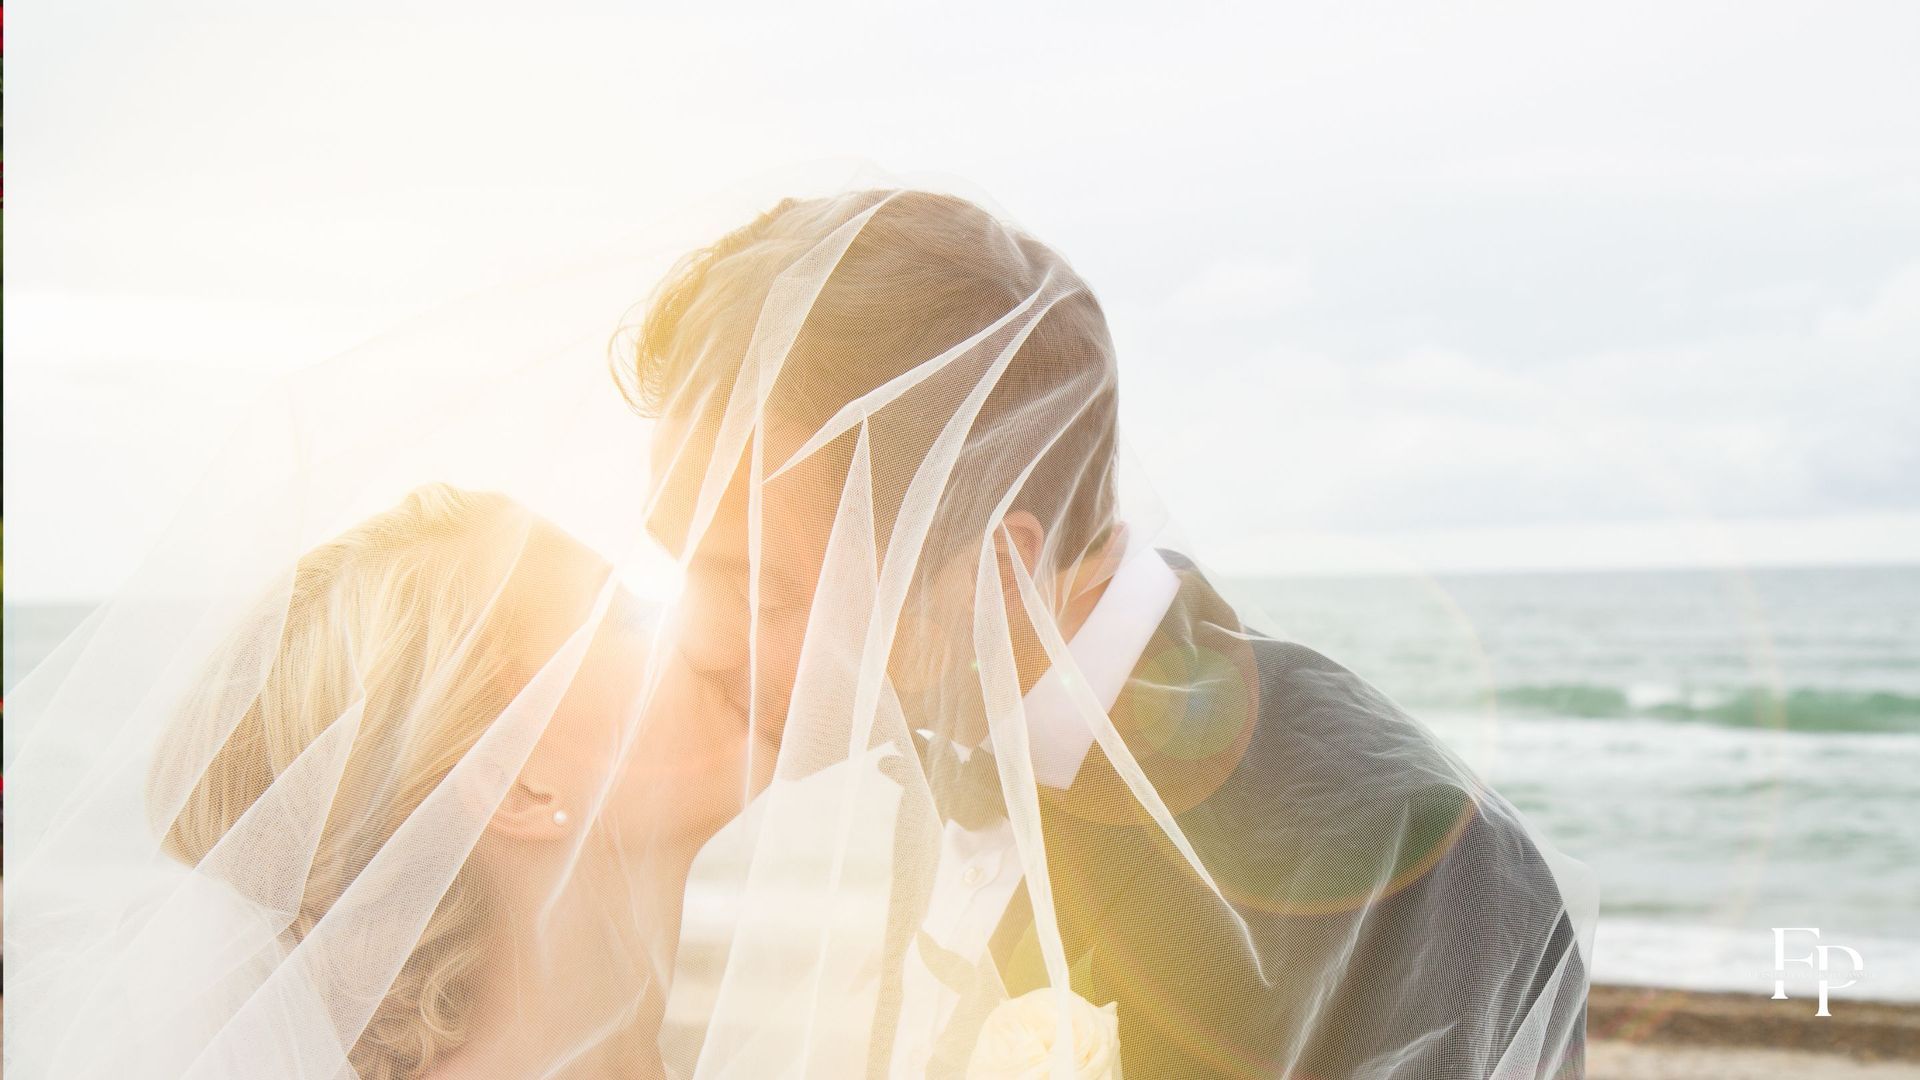 The bride's radiant smile illuminates her face as she leans into her partner, her veil gently fluttering in the evening breeze, while groom, dapper in his suit, cradles her face tenderly.